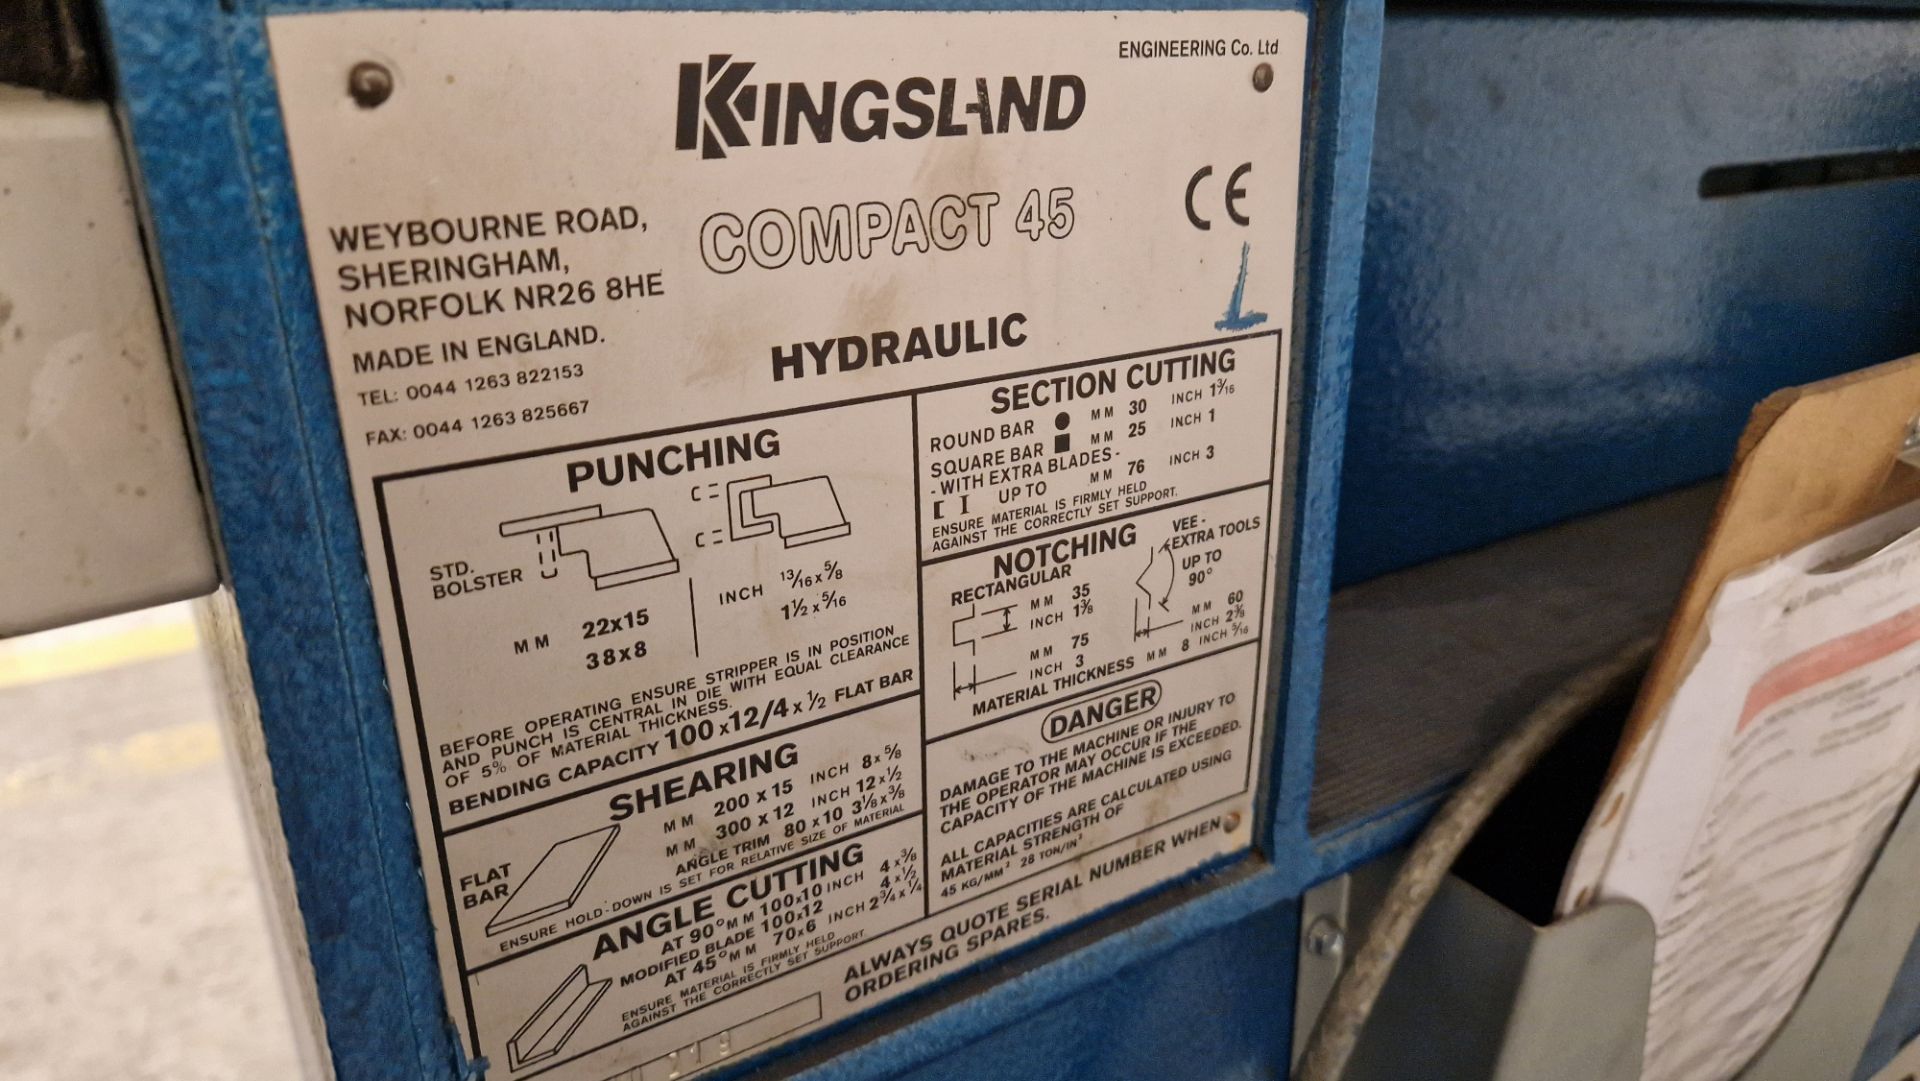 KINGSLAND COMPACT 45 HYDRAULIC METAL WORKER, *** ASSETS ARE LOCATED IN NEWCASTLE-UNDER-LYME*** - Bild 4 aus 4